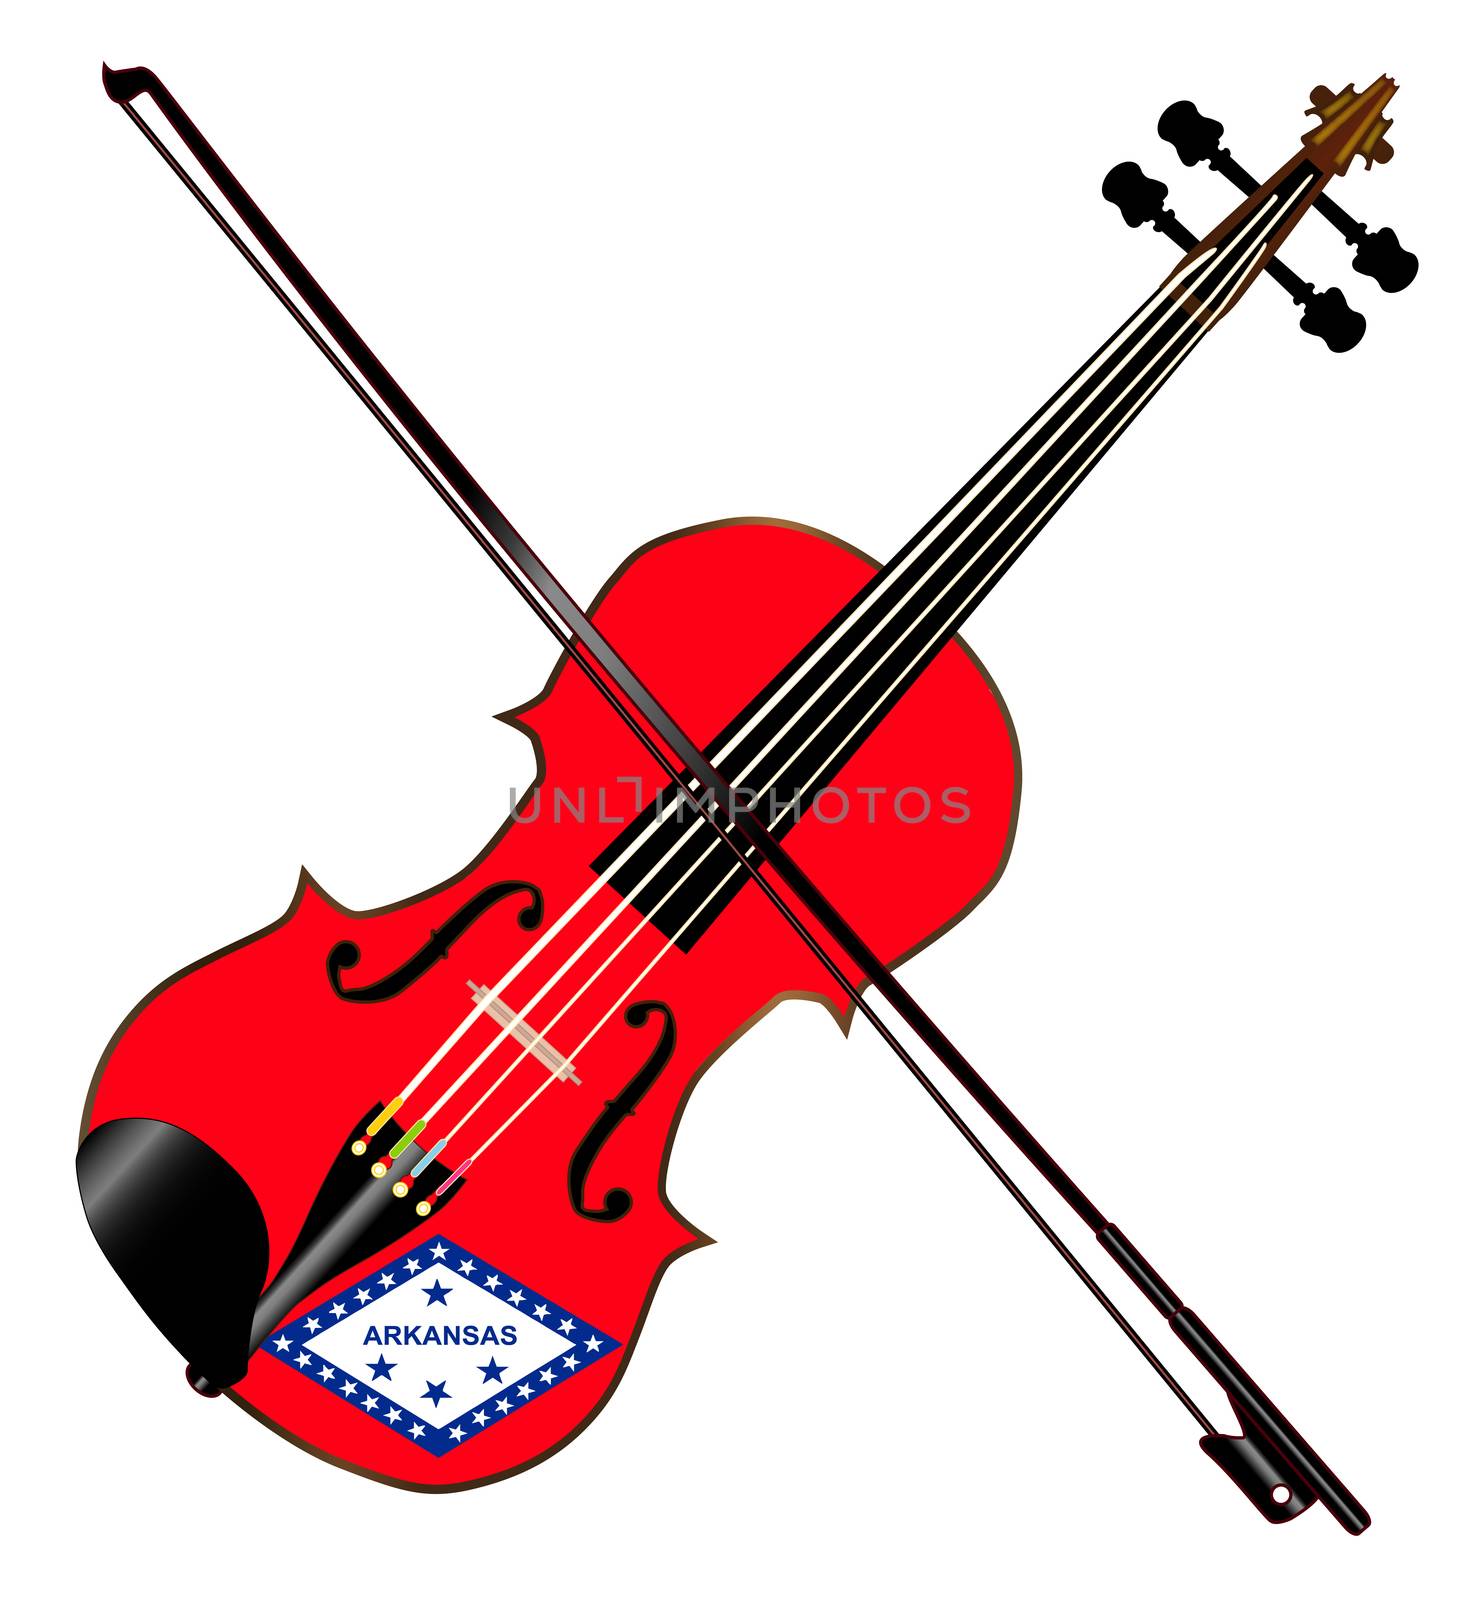 A typical violin with Arkansas state flag and bow isolated over a white background